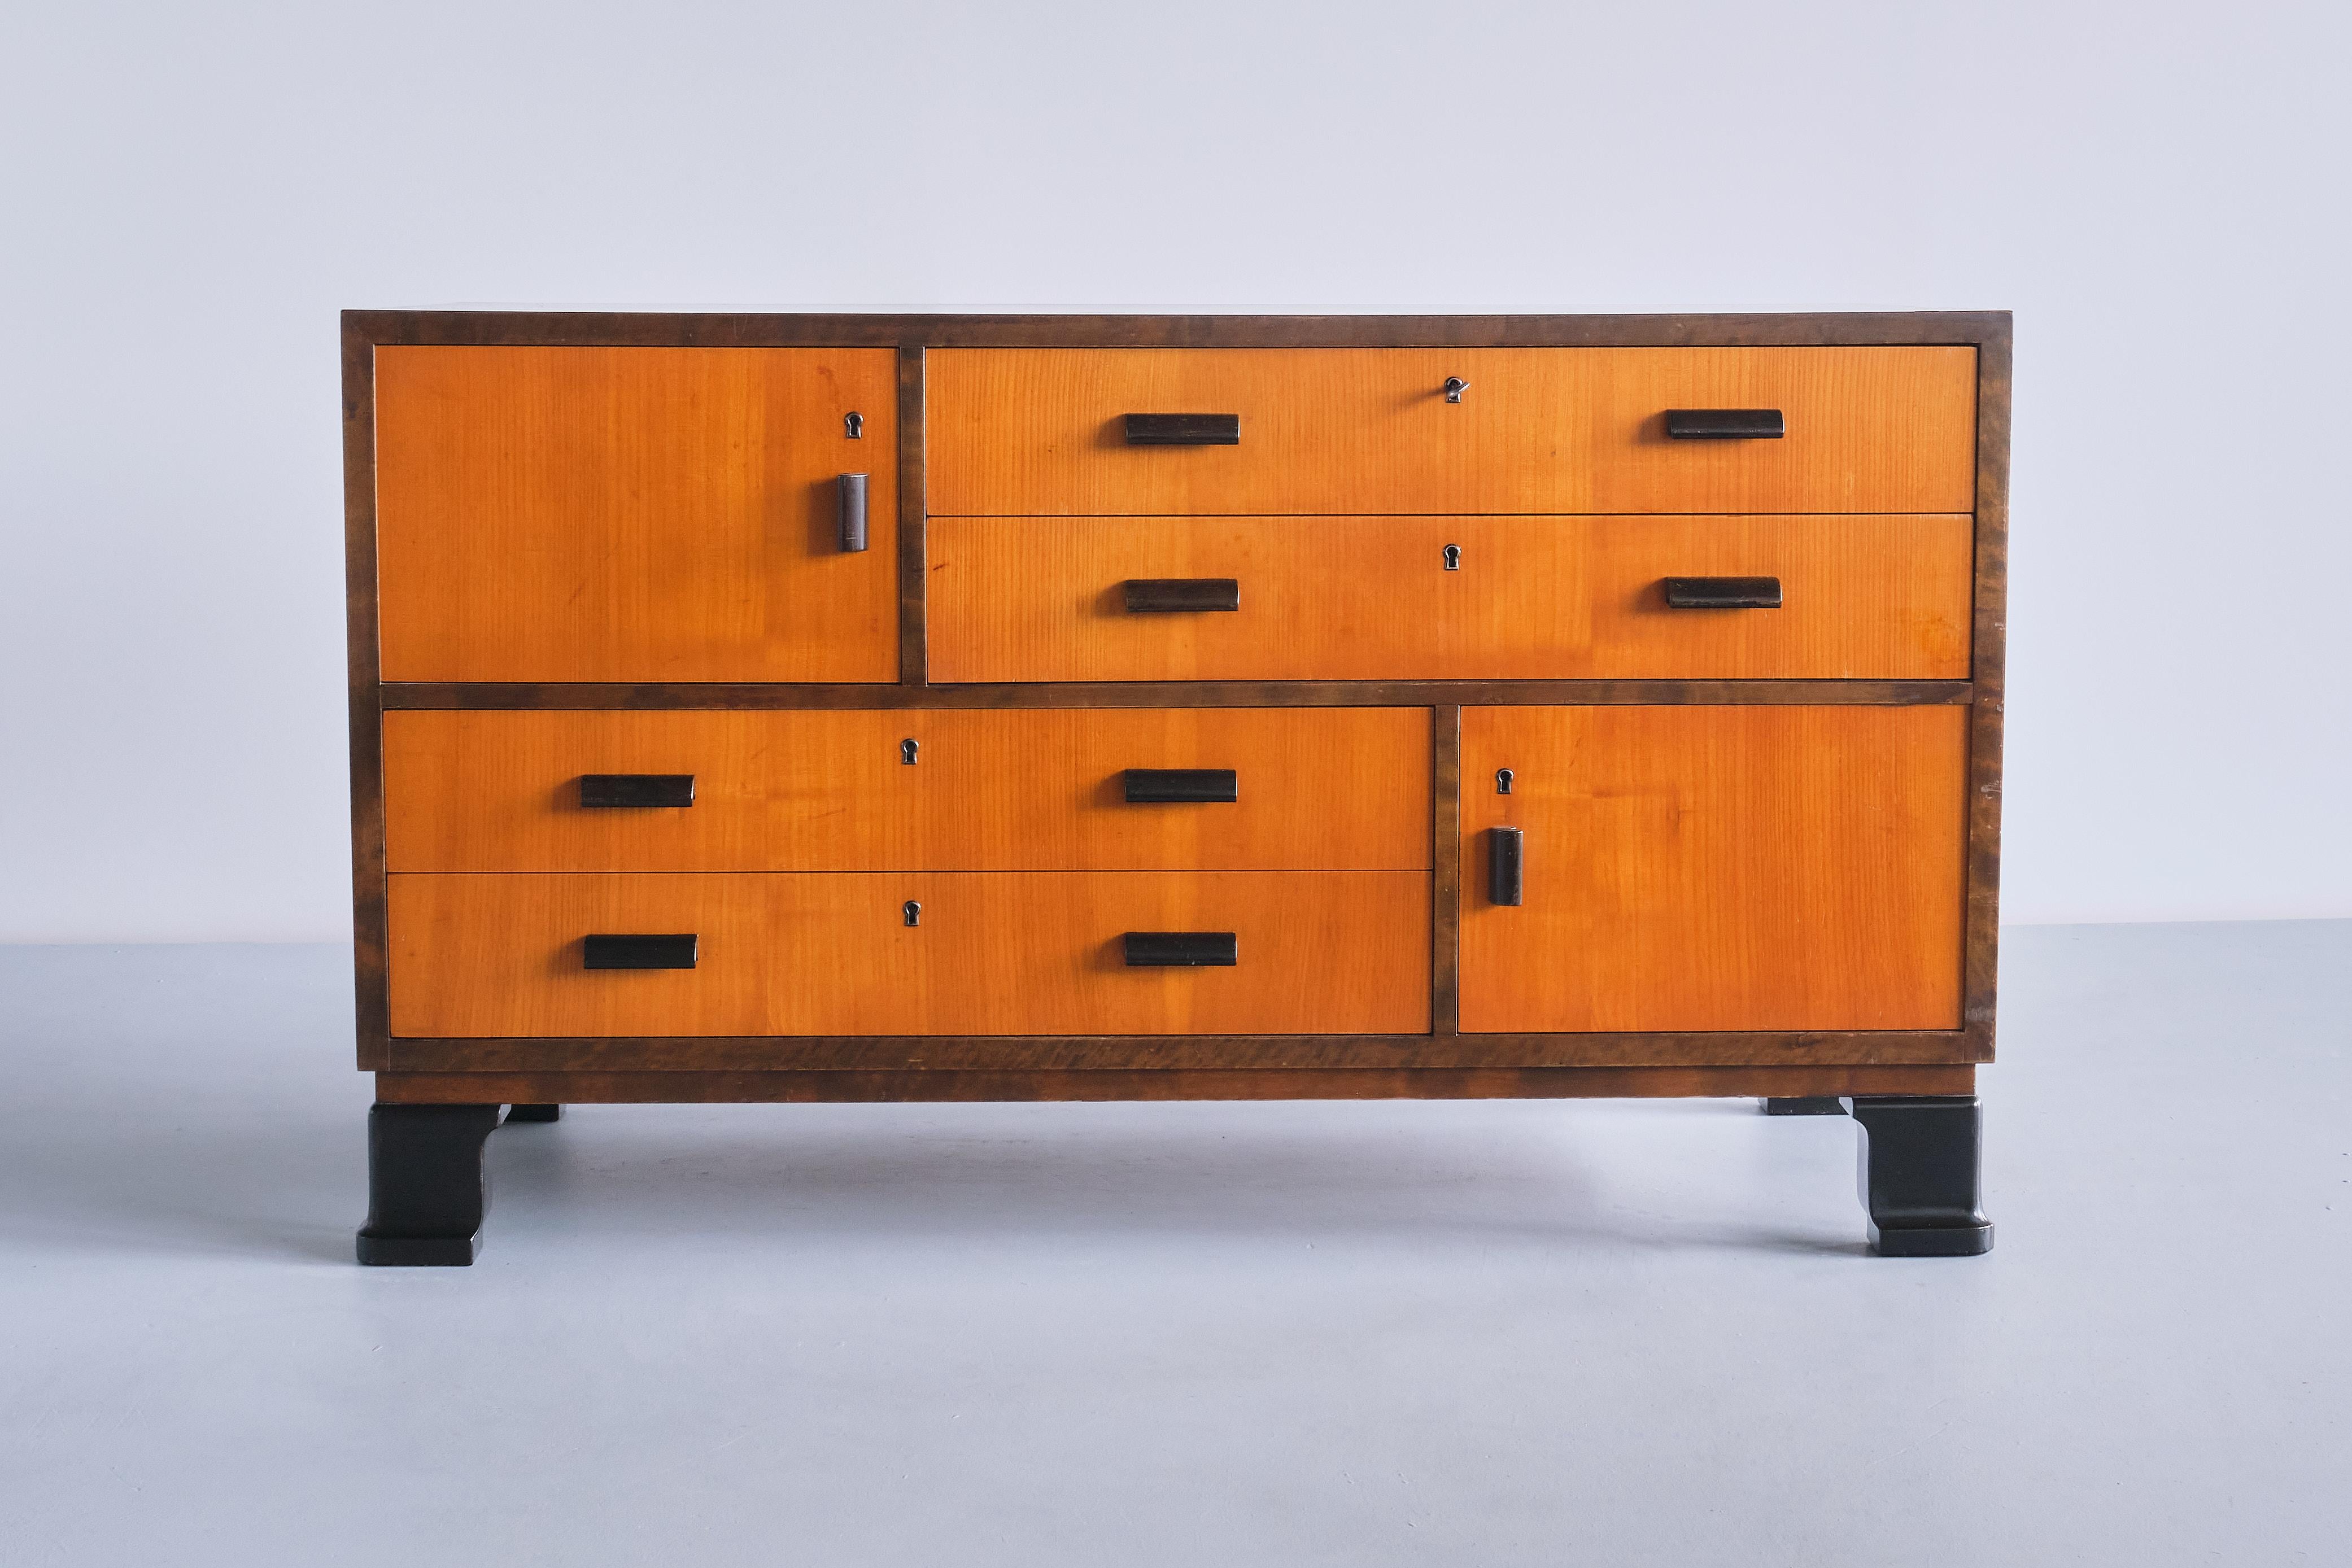 This rare pair of sideboards/ chests of drawers was designed by the Swedish designer Axel Larsson. They were produced by SMF Svenska Möbelfabriken in Bodafors, Sweden in the 1940s. The pieces are marked with the manufacturer's company plate.

The